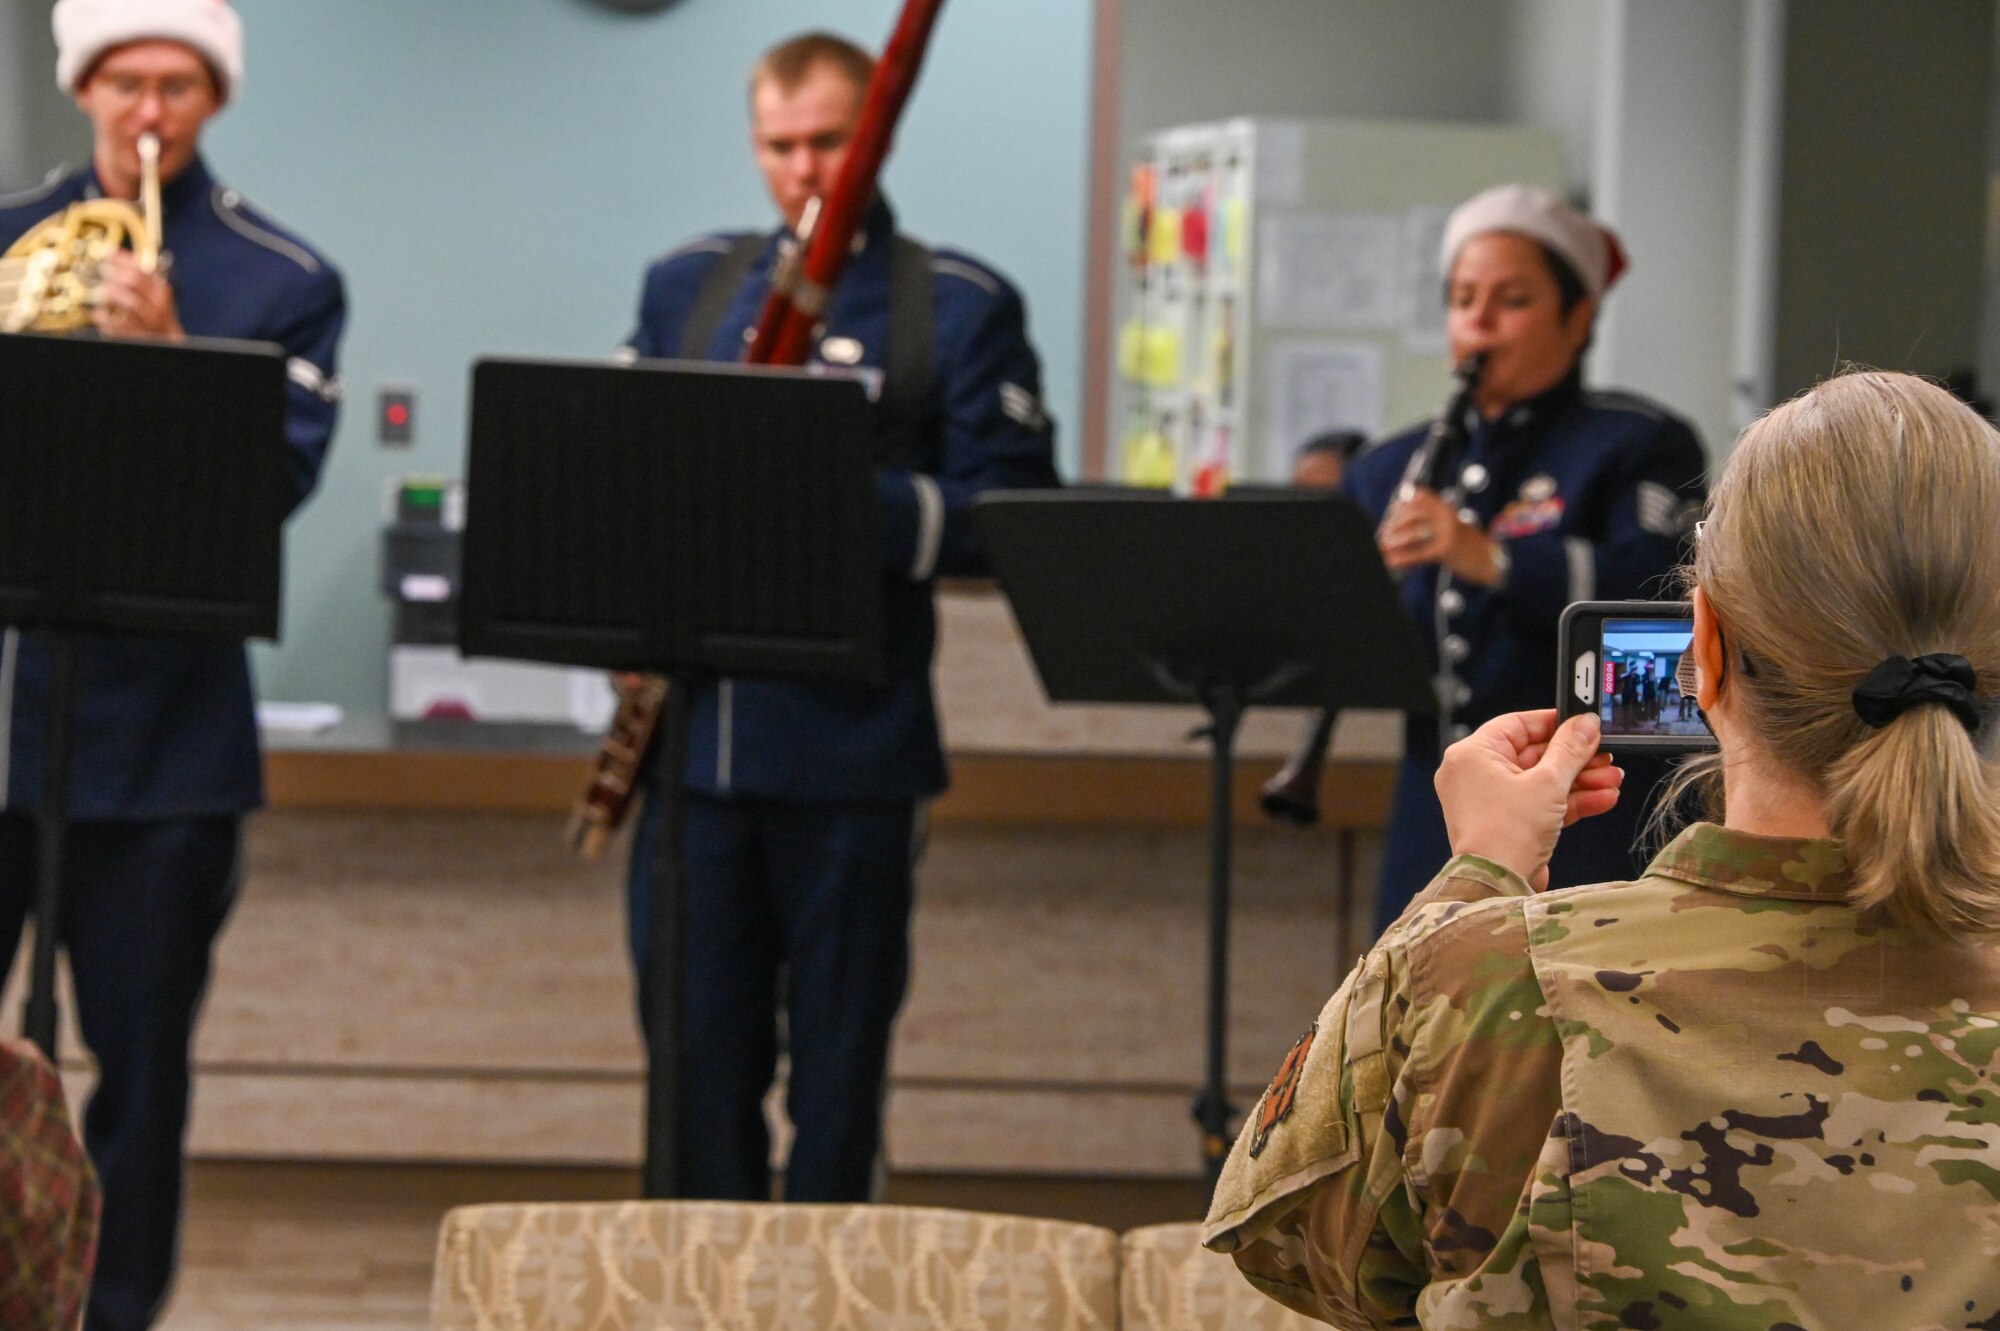 U.S. Air Force Col. Judy Rattan, 97th Medical Group (MDG) commander, records a video of the U.S. Air Force Band of the West performing at the 97th MDG at Altus Air Force Base, Oklahoma, Dec. 14, 2021. The USAF Band of the West has performed for presidents, heads of state, and dignitaries from around the world, earning an outstanding reputation among America's military bands. (U.S. Air Force photo by Airman 1st Class Kayla Christenson)